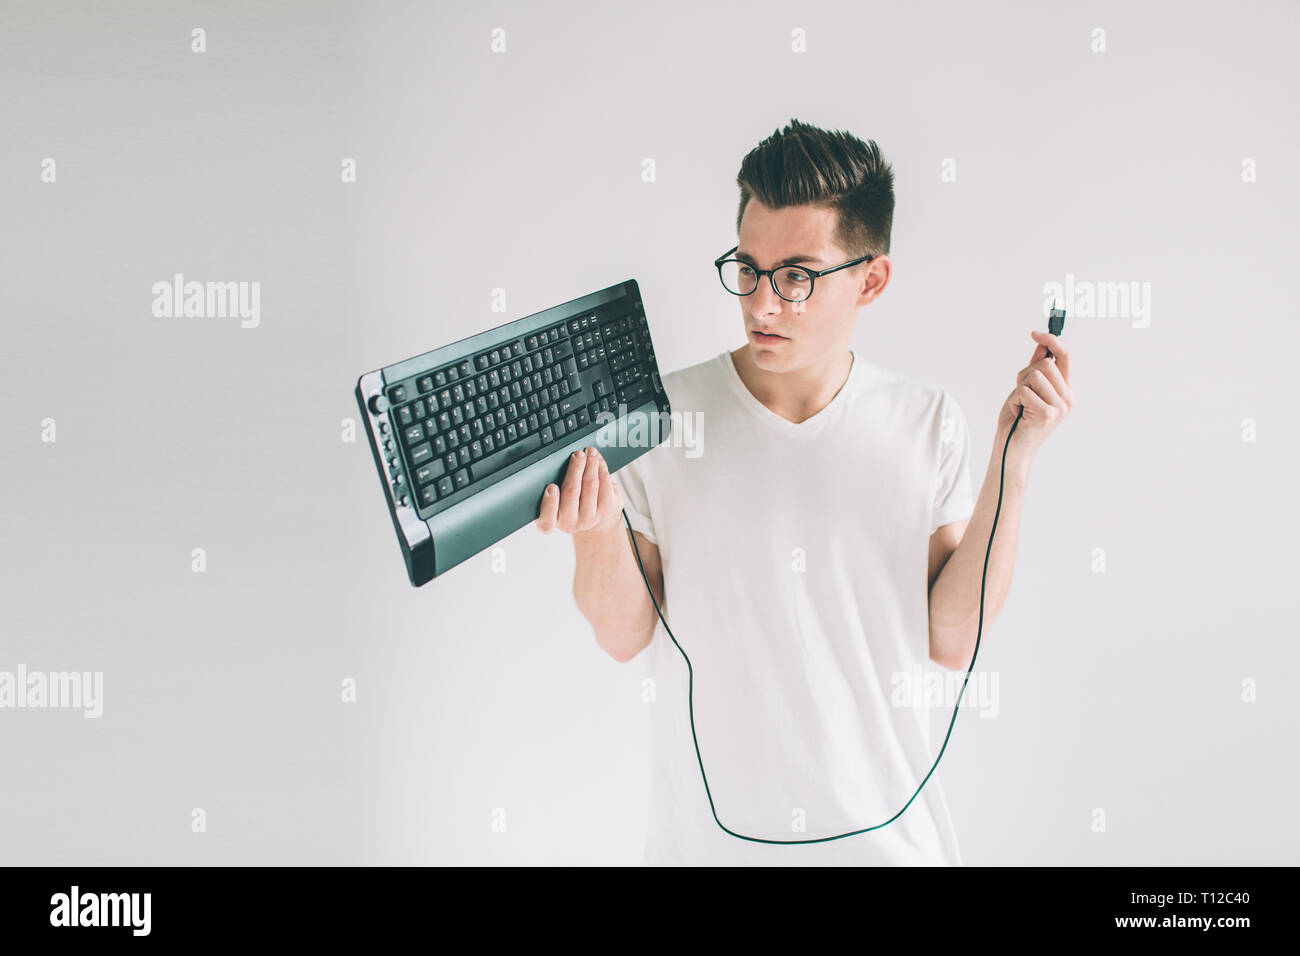 Funny computer geek isolated on white. Nerd is wearing glasses Stock Photo